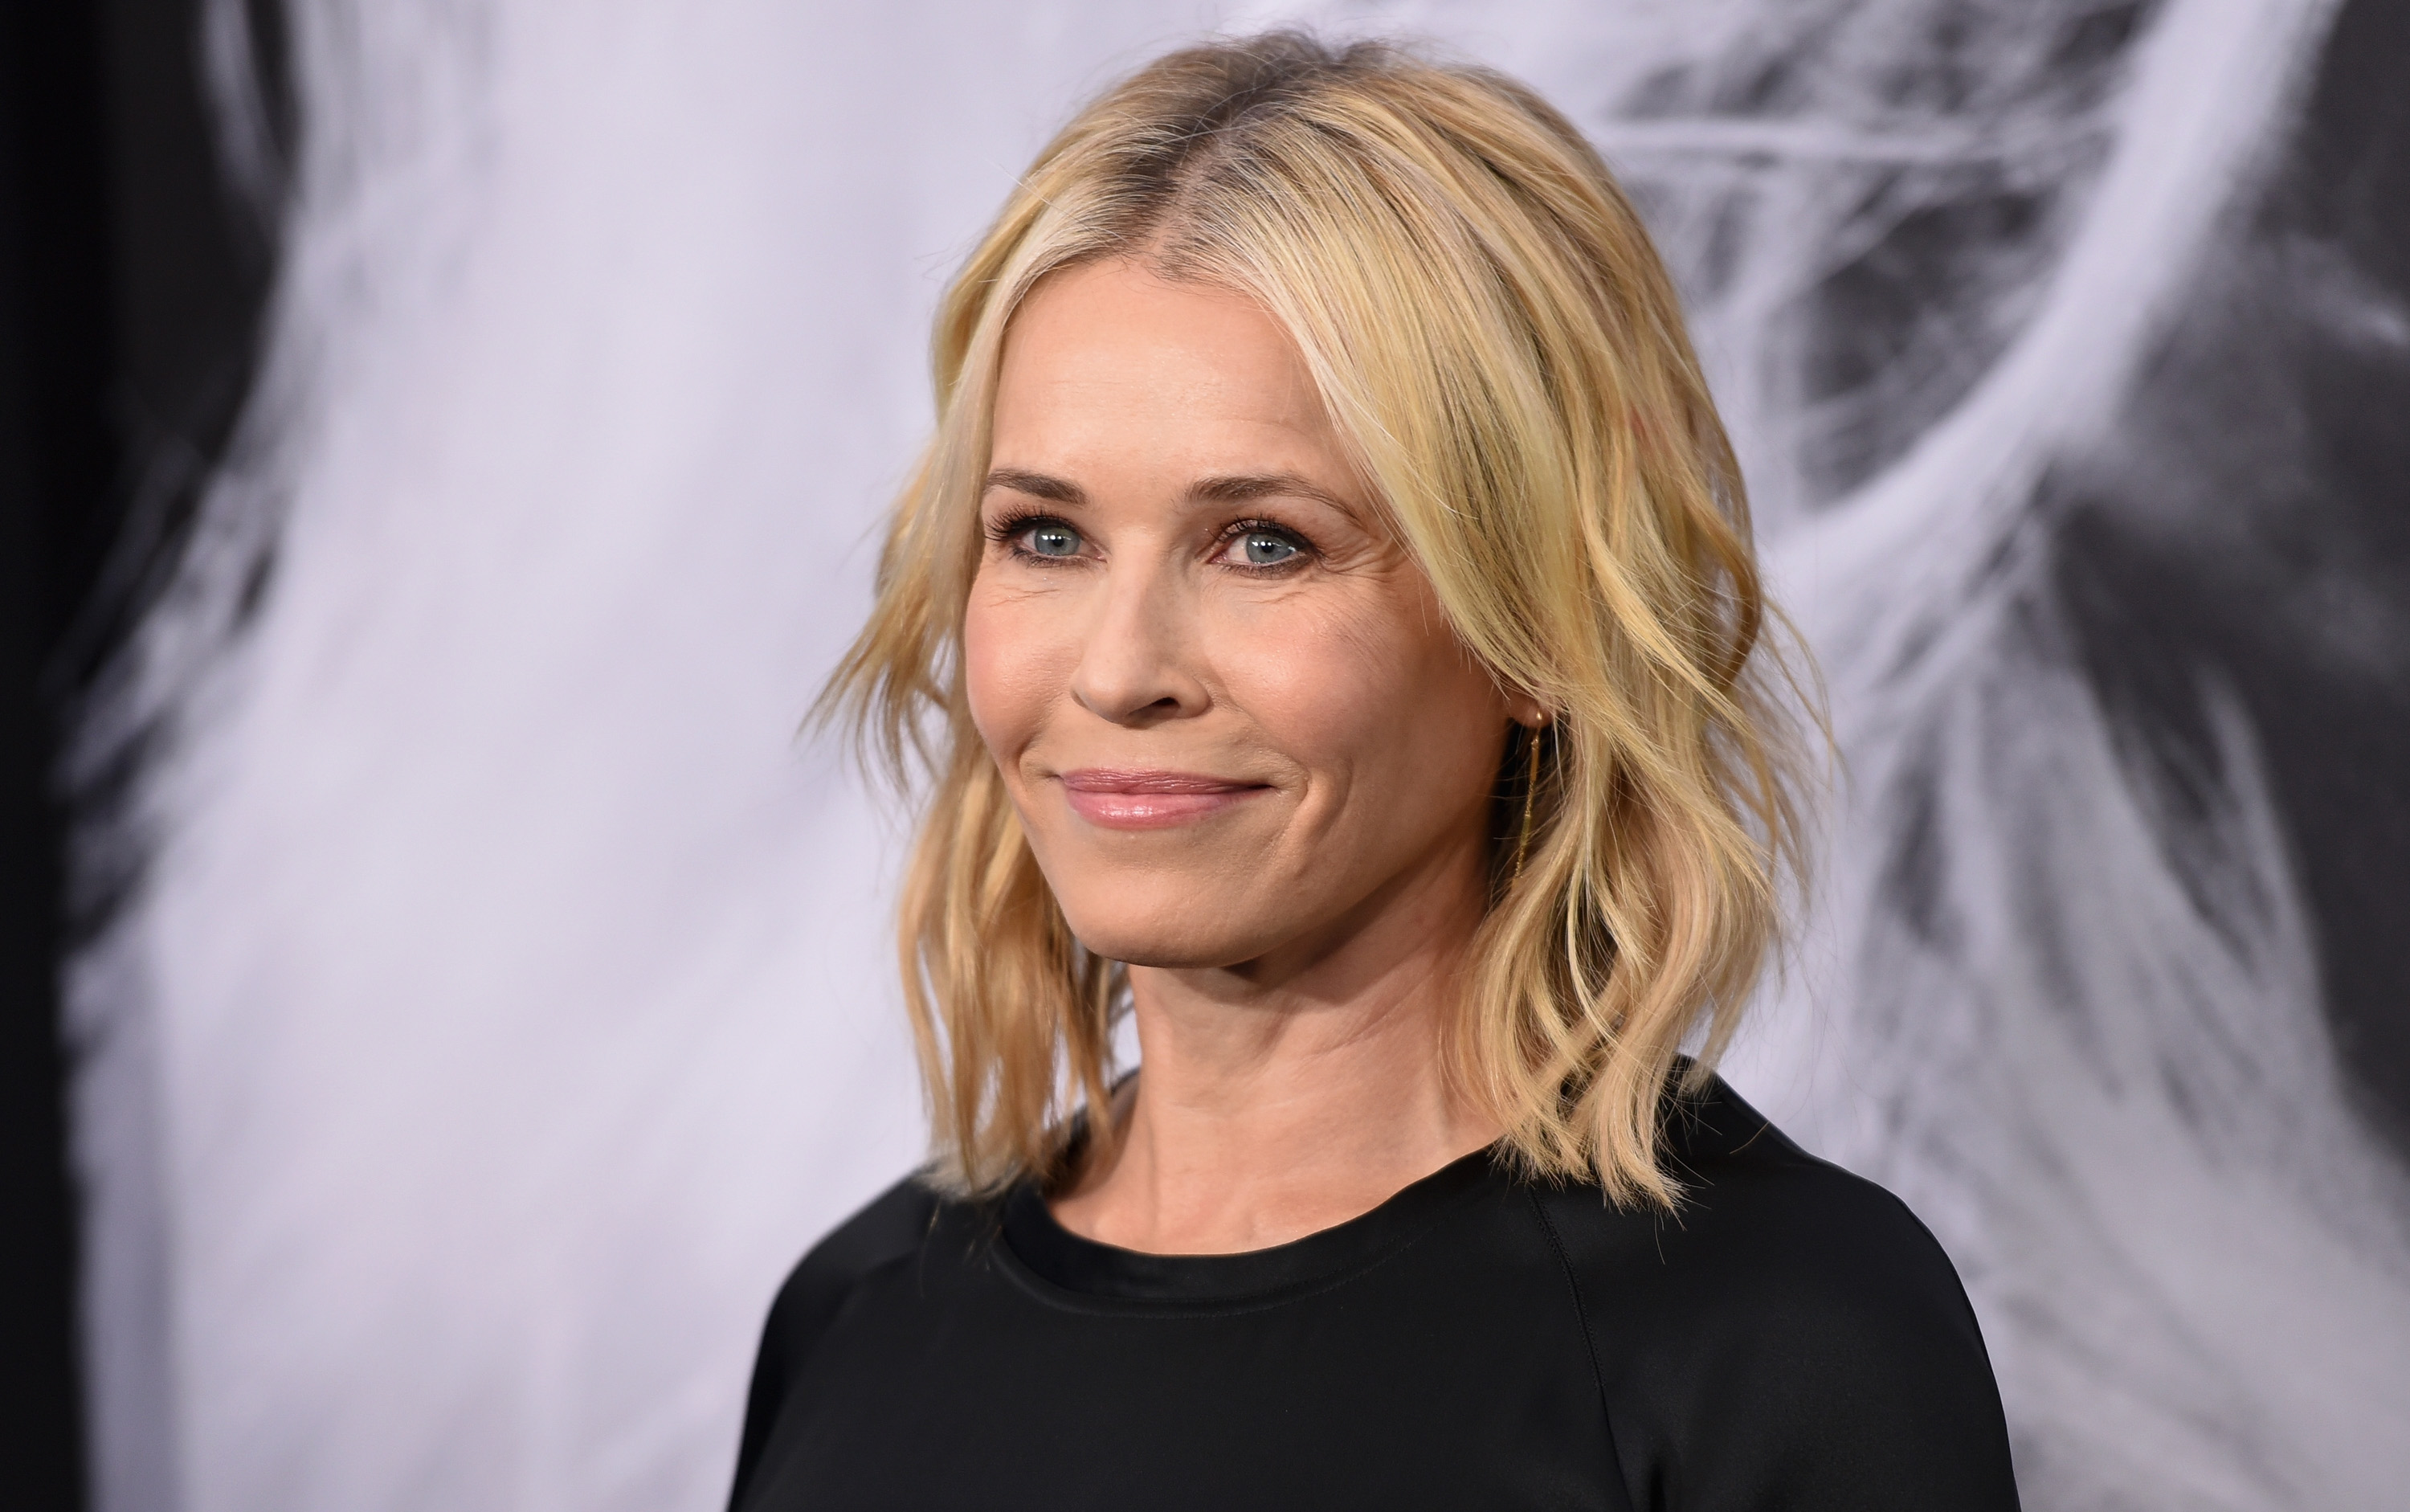 Chelsea handler dating cent and 50 Does Chelsea